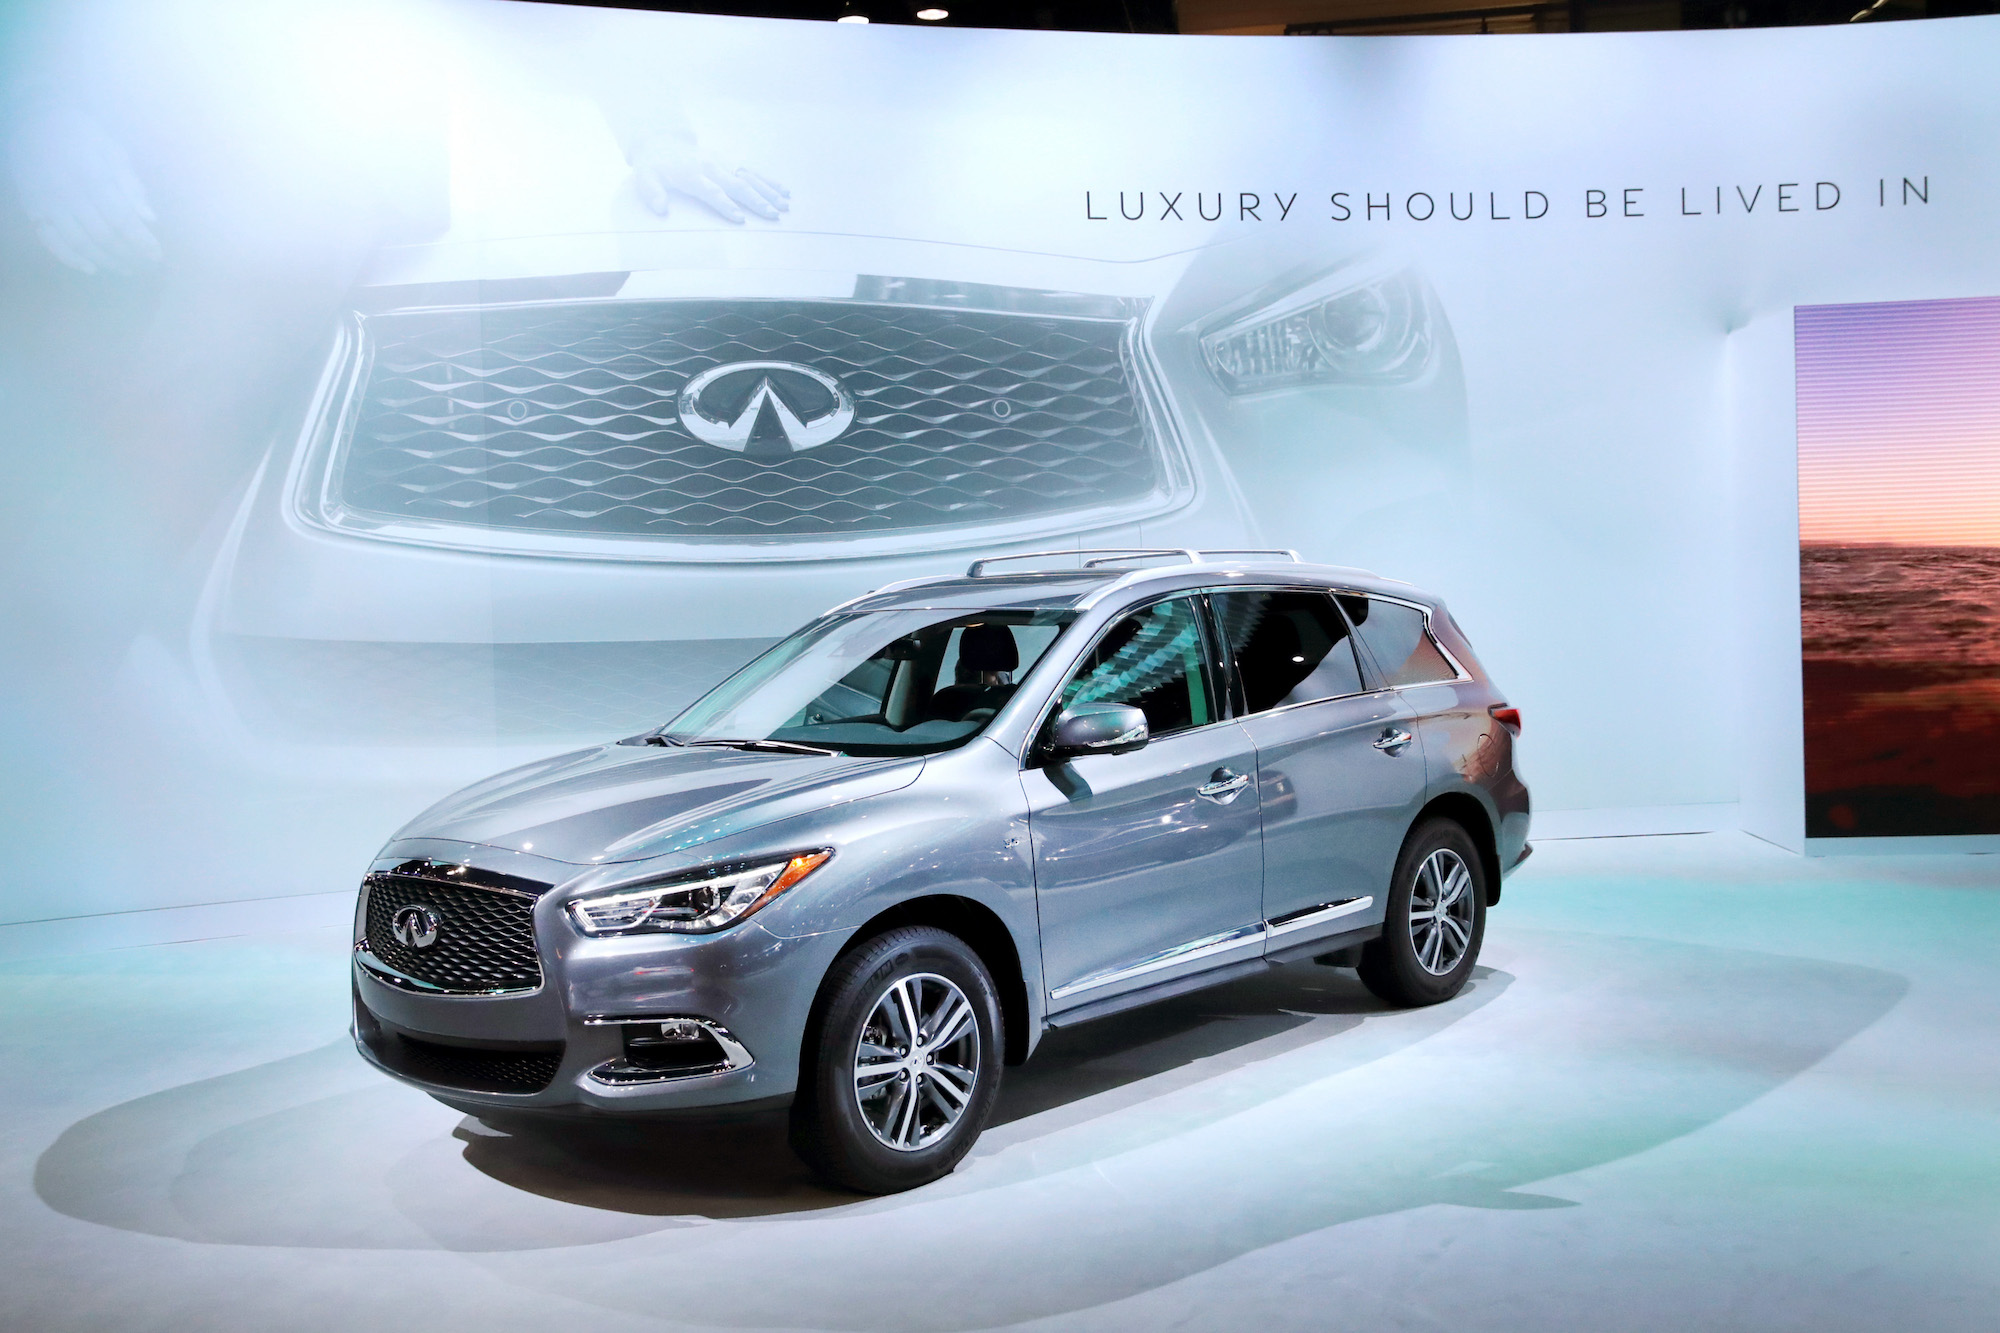 Infiniti shows off the QX60 SUV at the Chicago Auto Show on February 06, 2020